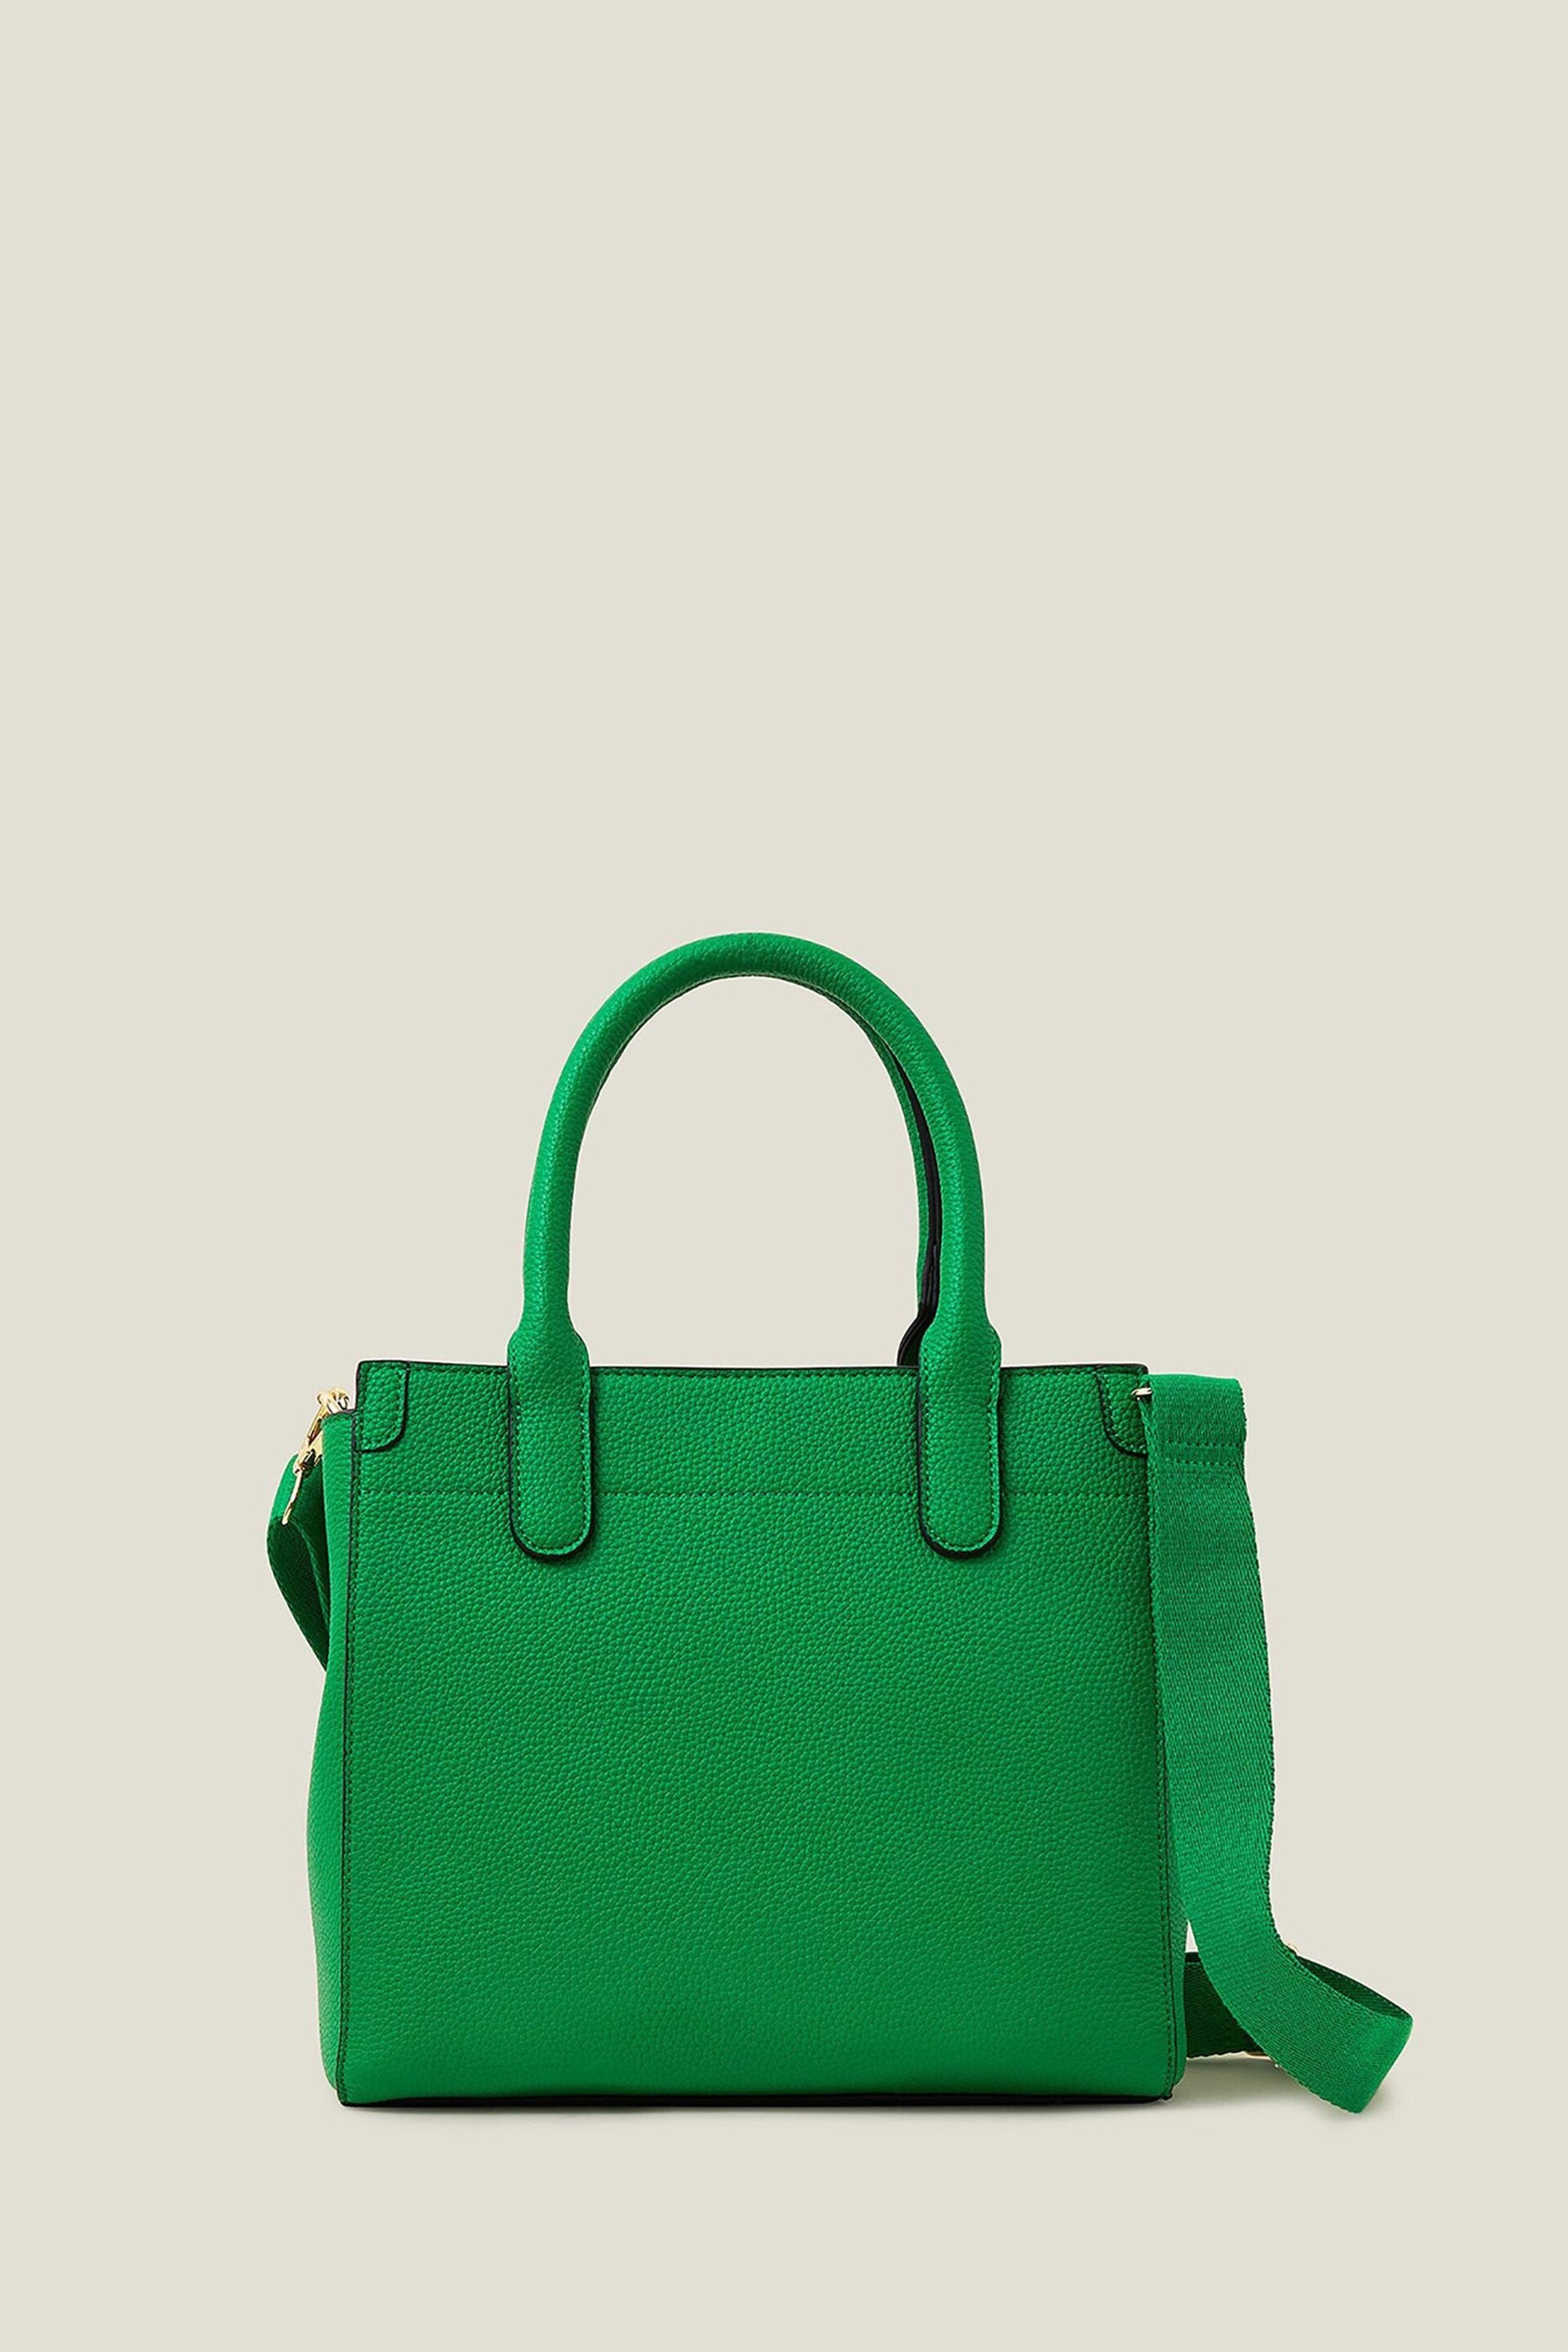 Accessorize Green Handheld Bag with Webbing Strap - Image 2 of 4